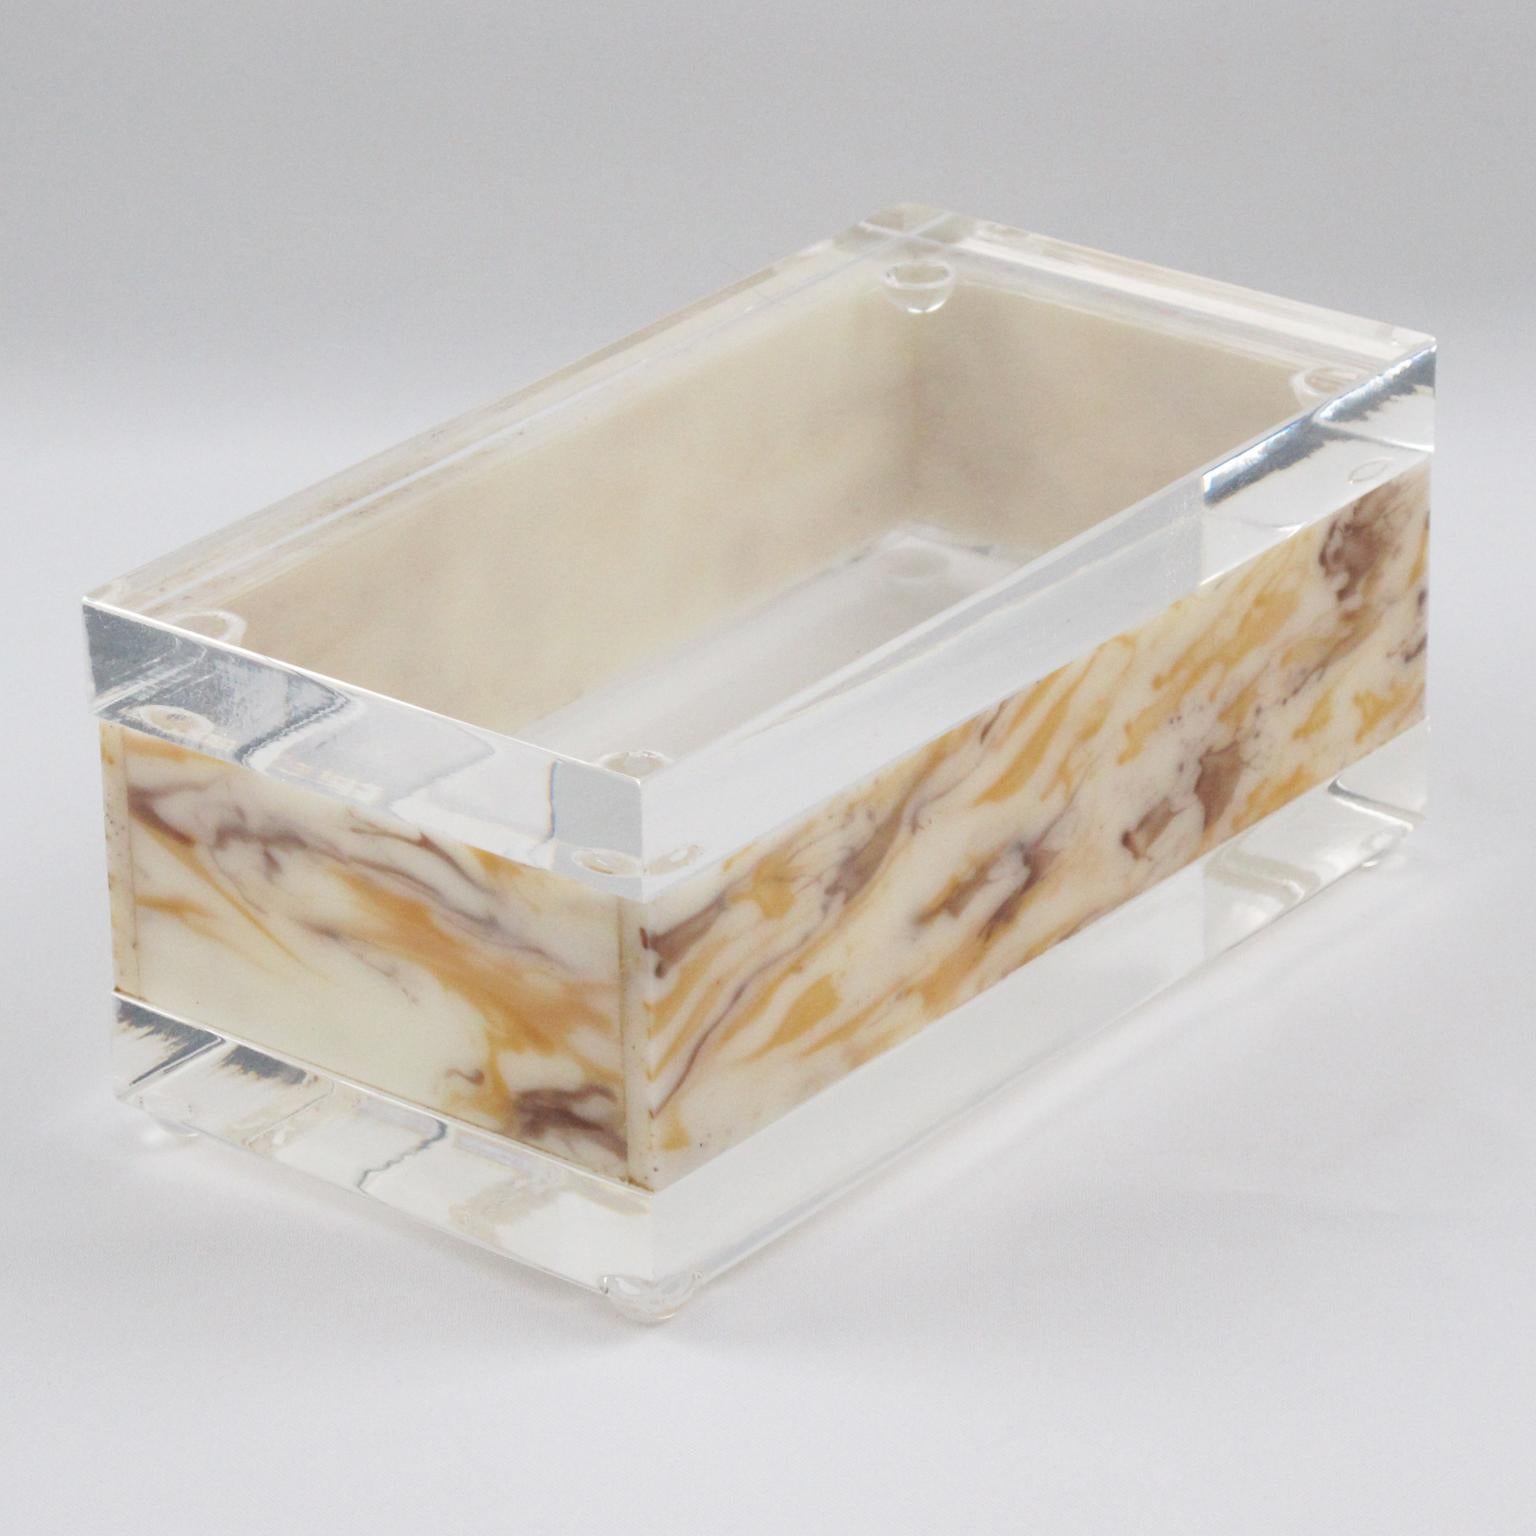 This lovely modernist Lucite box was crafted in the 1970s. The rectangular shape boasts a crystal clear Lucite or Acrylic and faux marble textured pattern. The stunning milky honey and amber swirl color looks like genuine marble. There is no visible